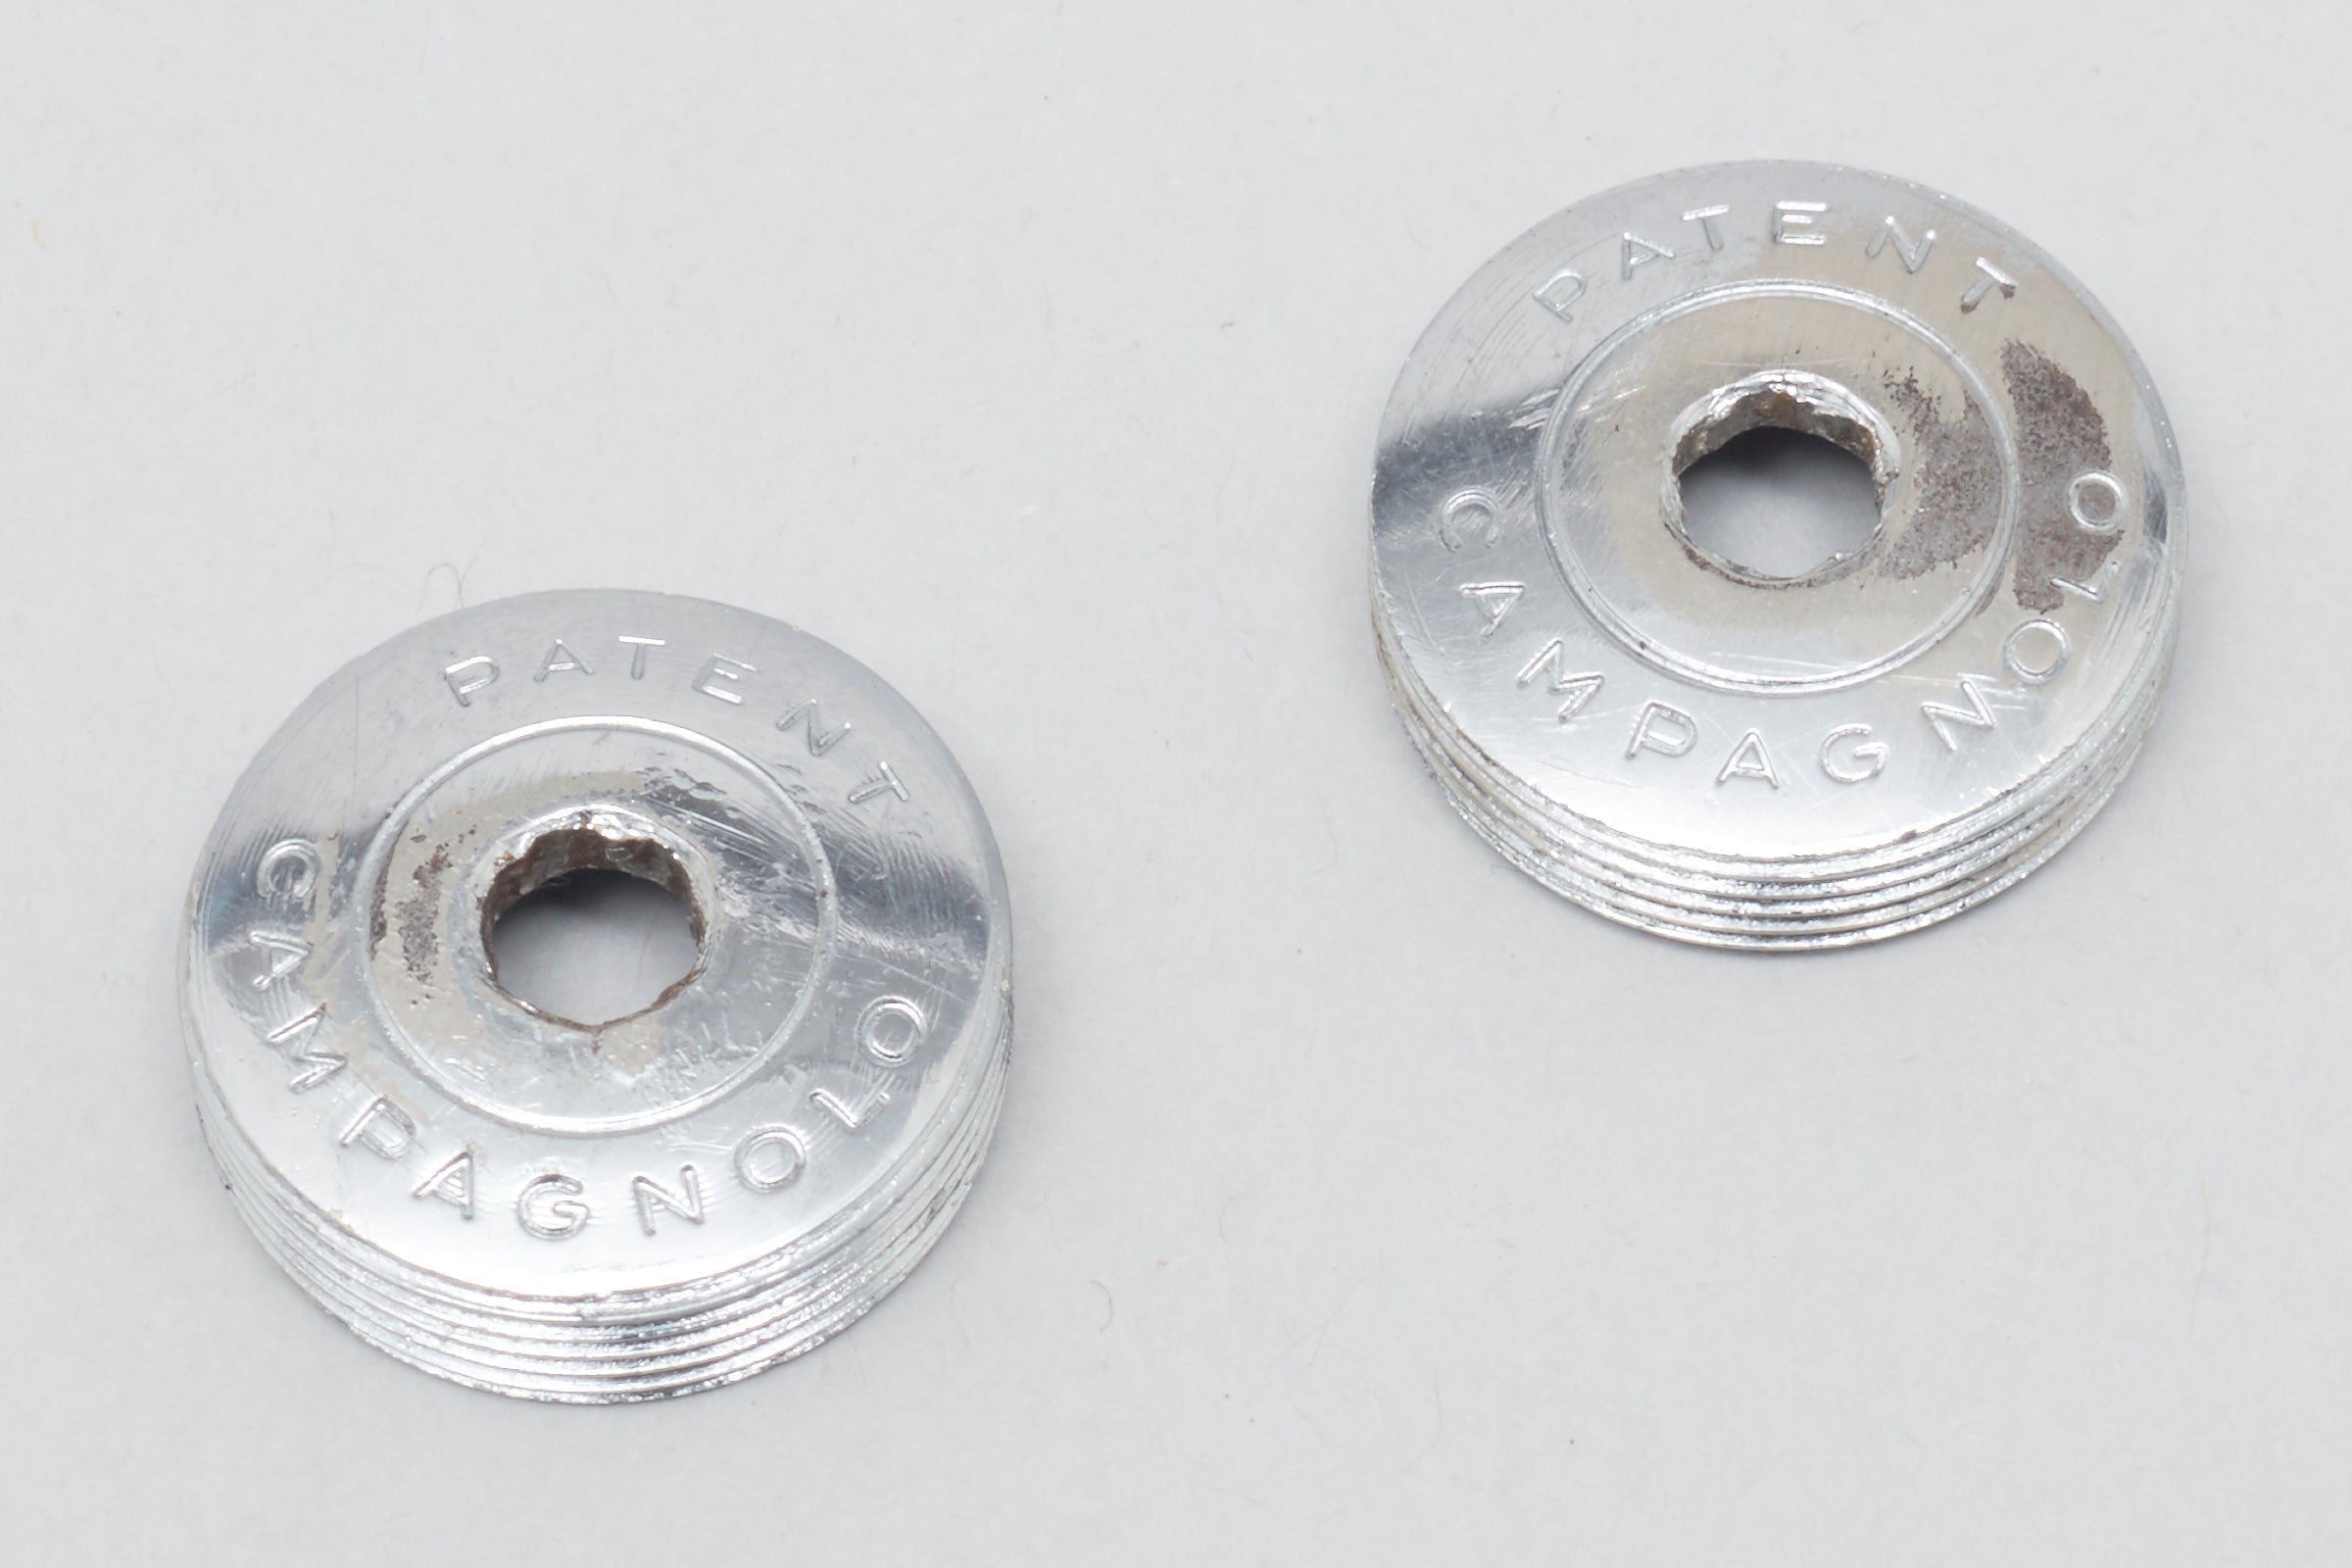 Campagnolo Nuovo/Super Record / Gran Sport (756) 'Patent' Later Type Vintage Crank Dust Caps / Covers - Pedal Pedlar - Bike Parts For Sale